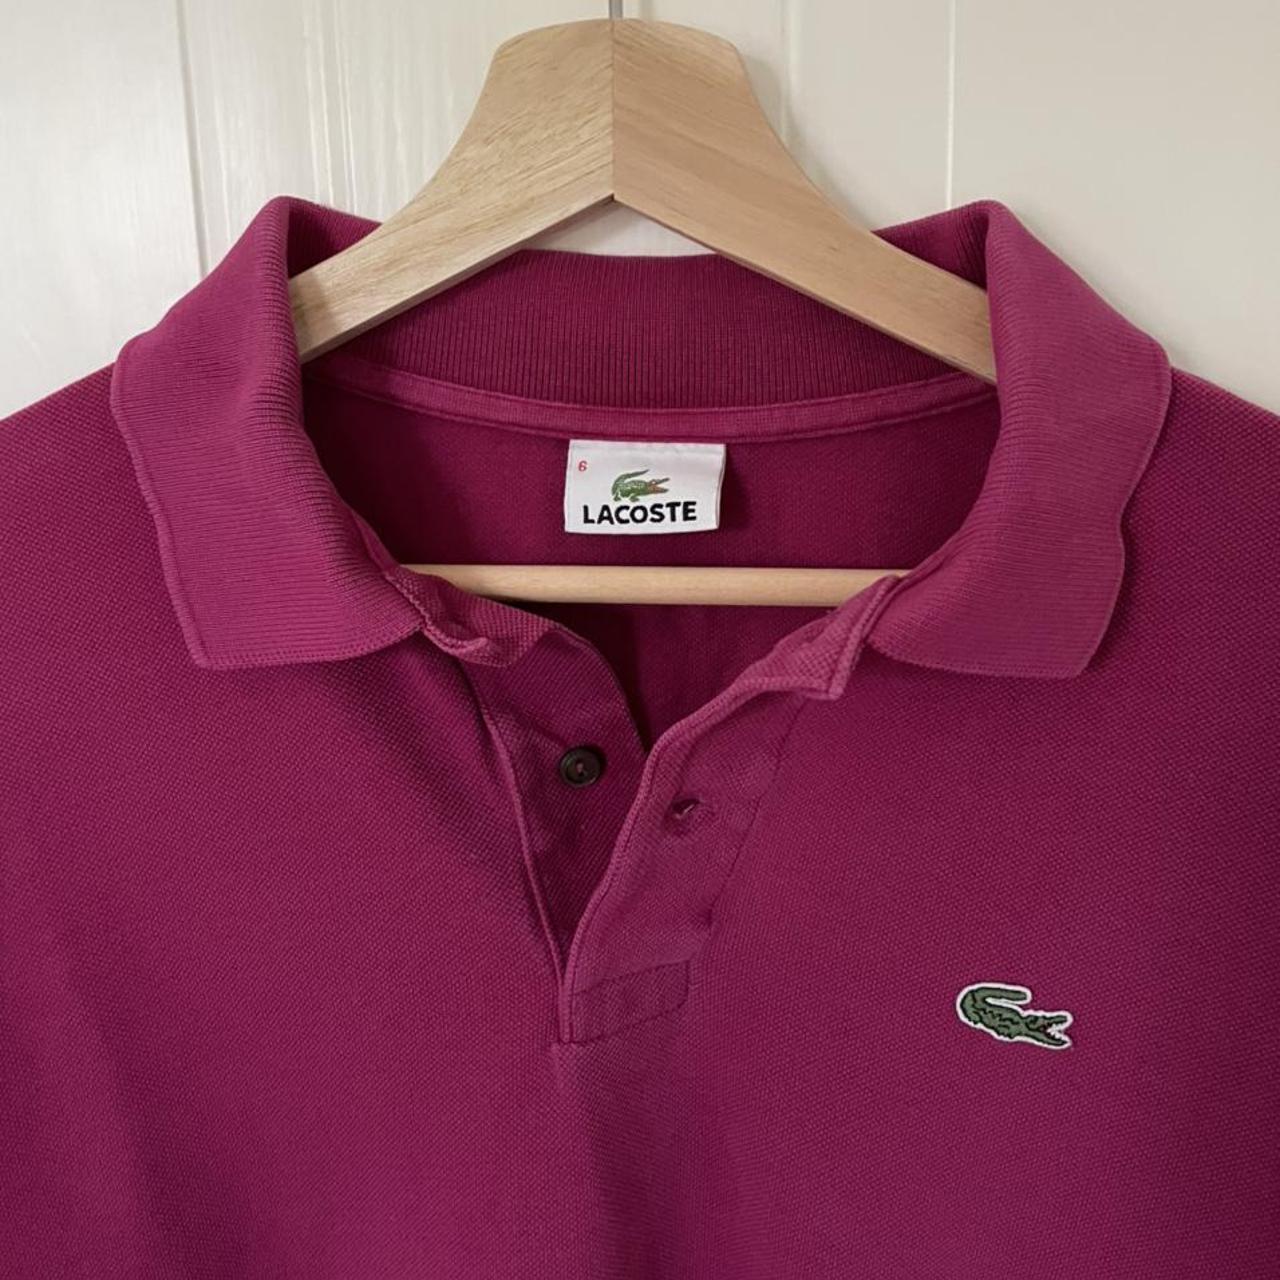 Incredible Lacoste magenta red polo shirt in... - Depop